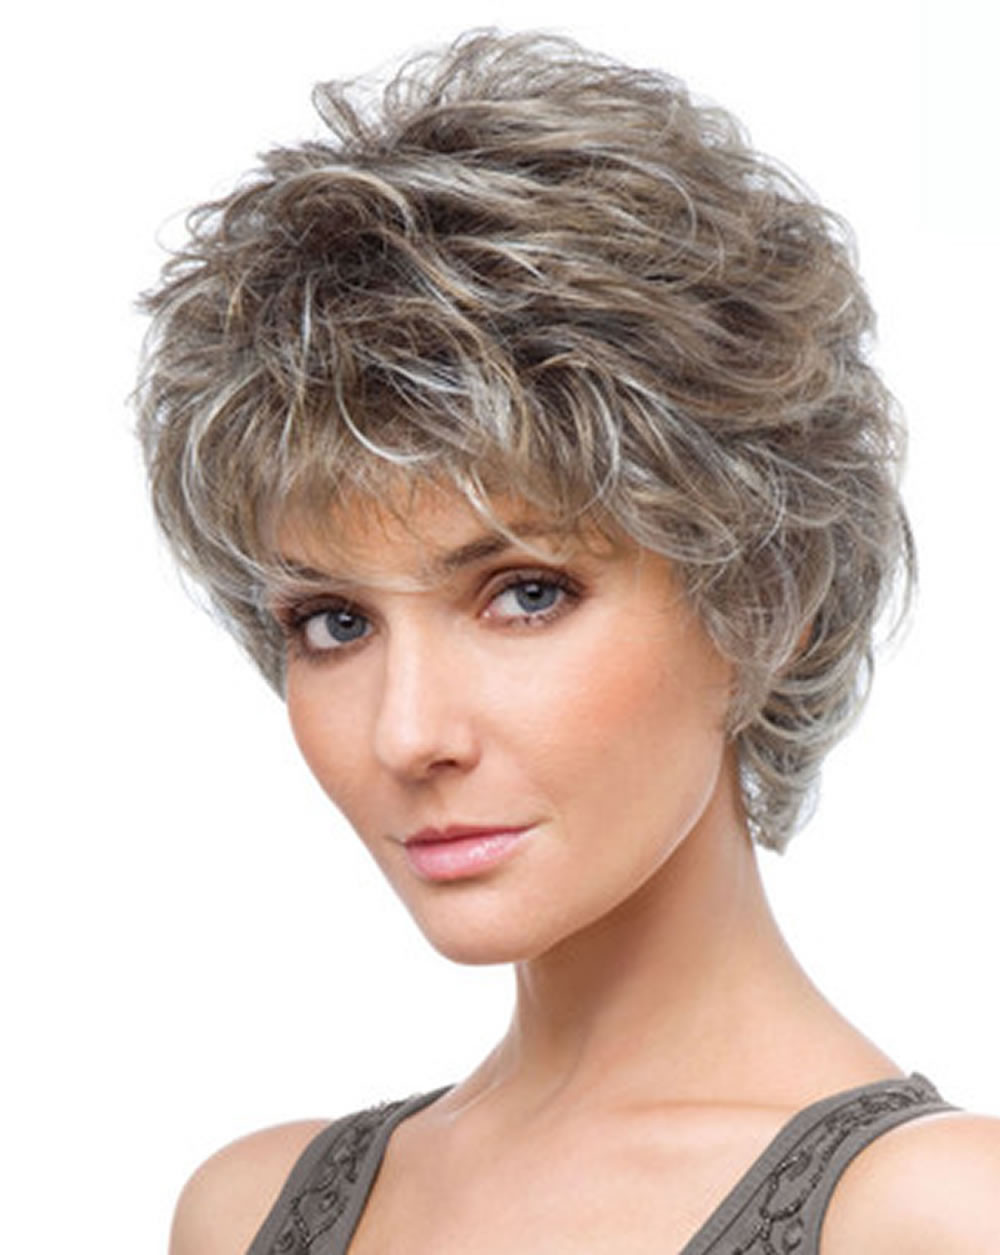 Short Easy Haircuts
 30 Easy Short Hairstyles for Older Women – You Should Try